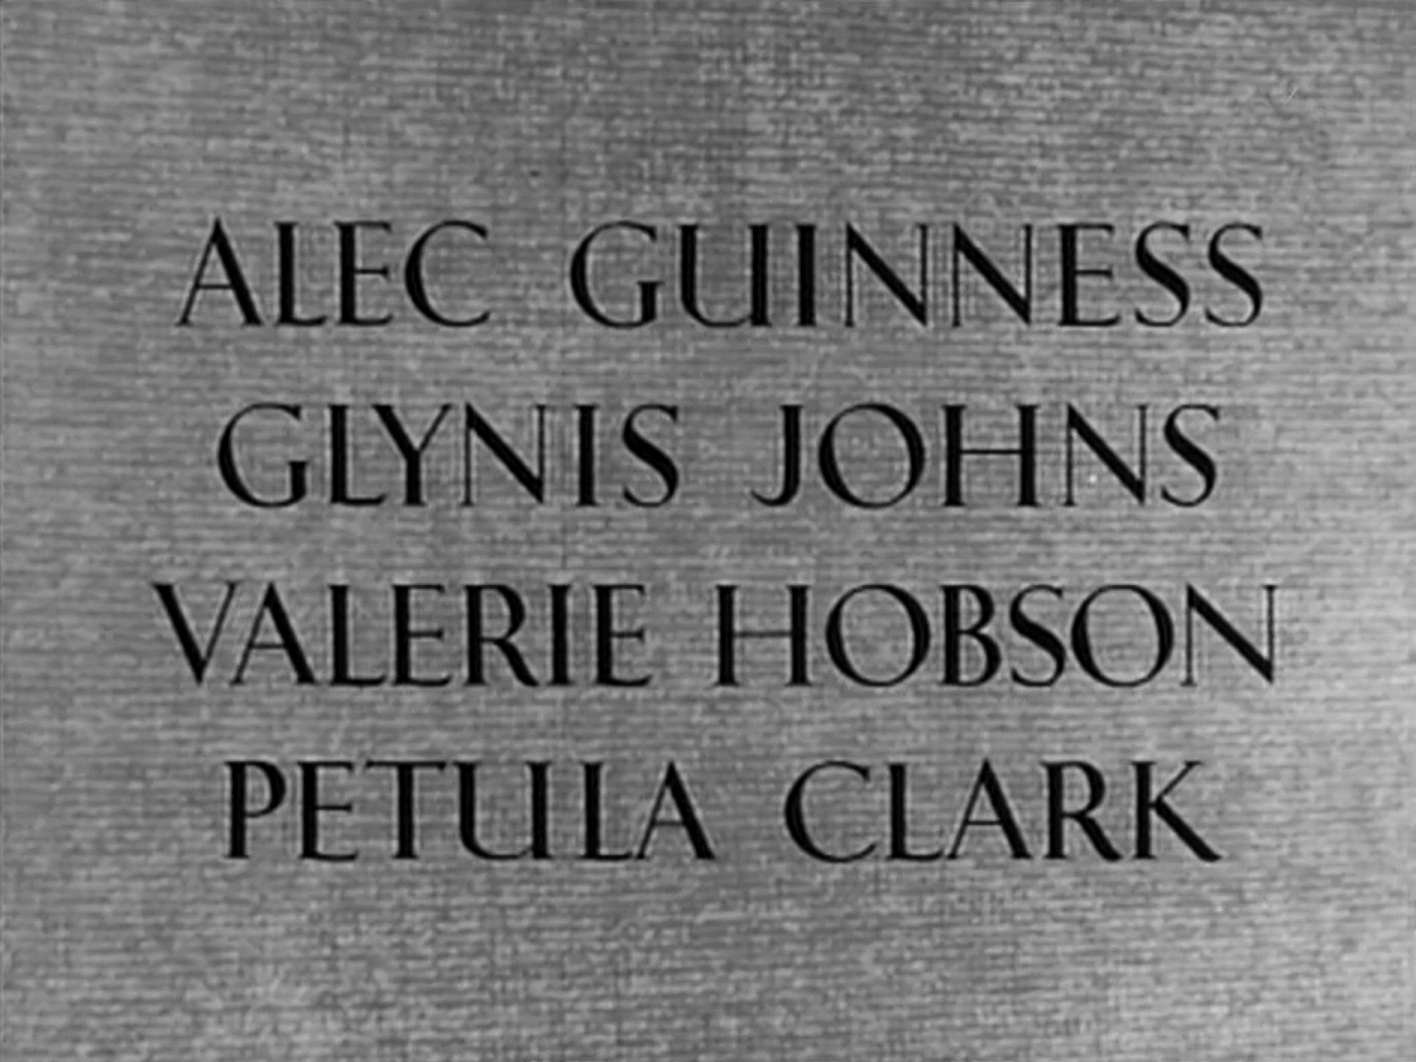 Main title from The Card (1952) (4). Alec Guinness, Glynis Johns, Valerie Hobson, Petula Clark